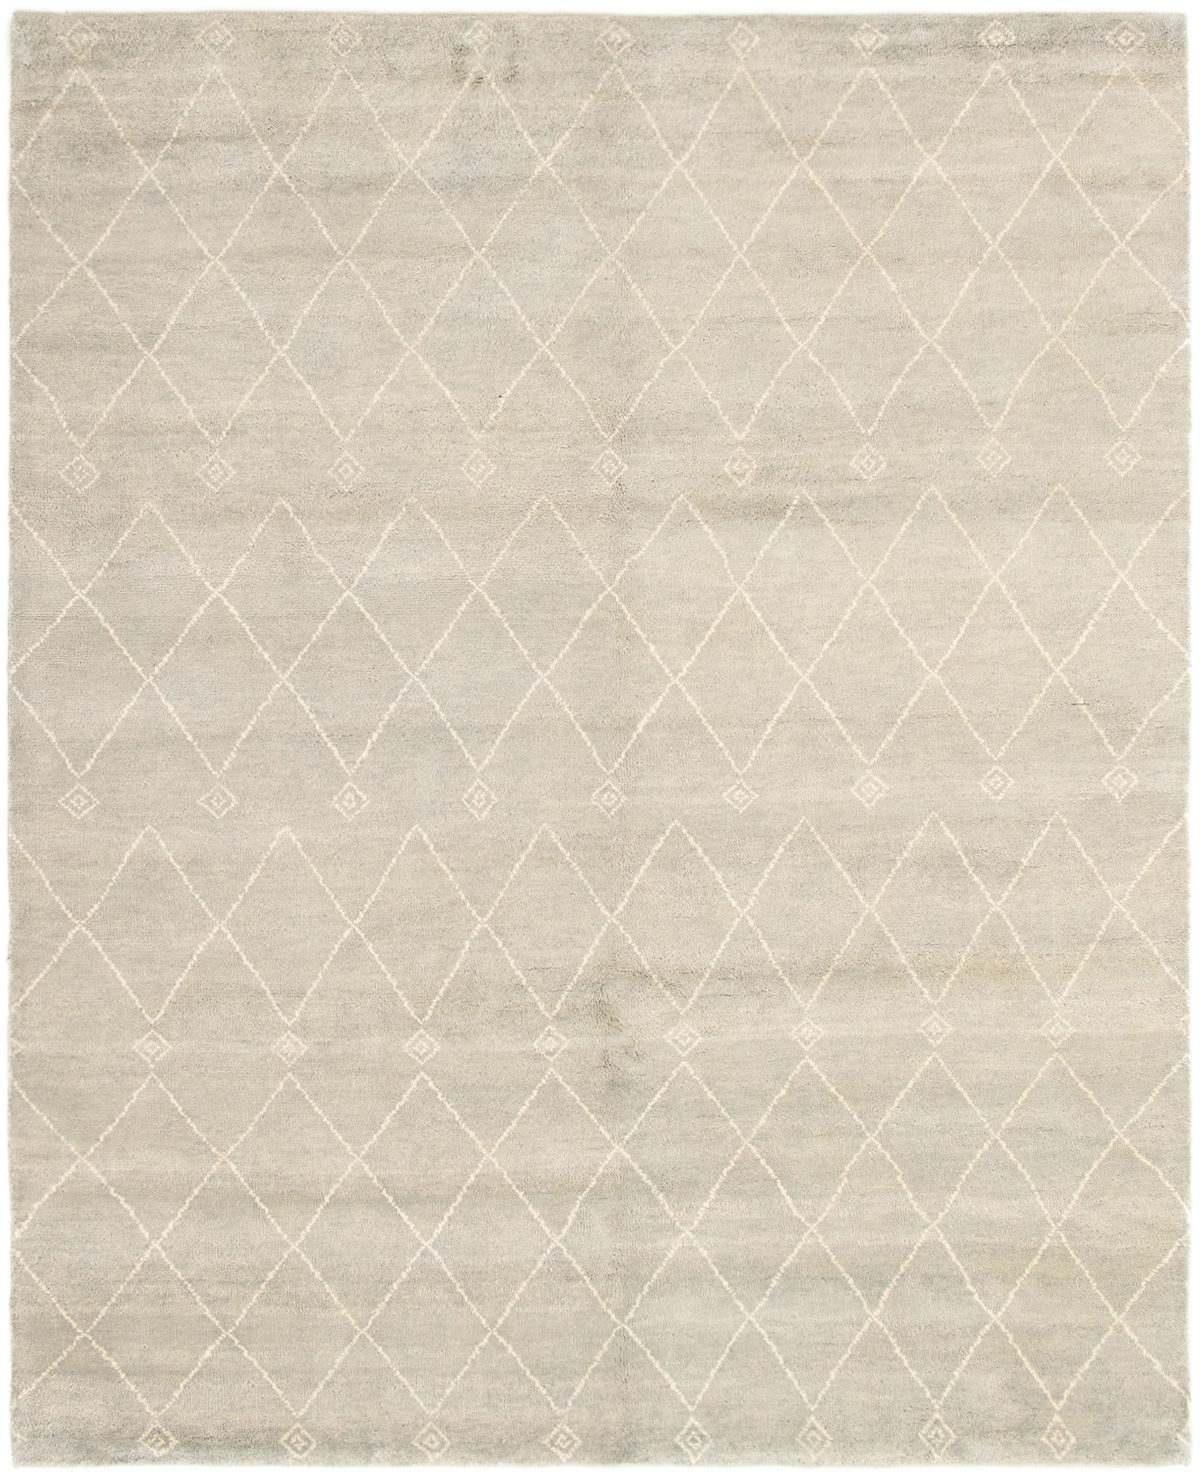 Hand-knotted Tangier Light Grey Wool Rug 8'1" x 9'10" Size: 8'1" x 9'10"  